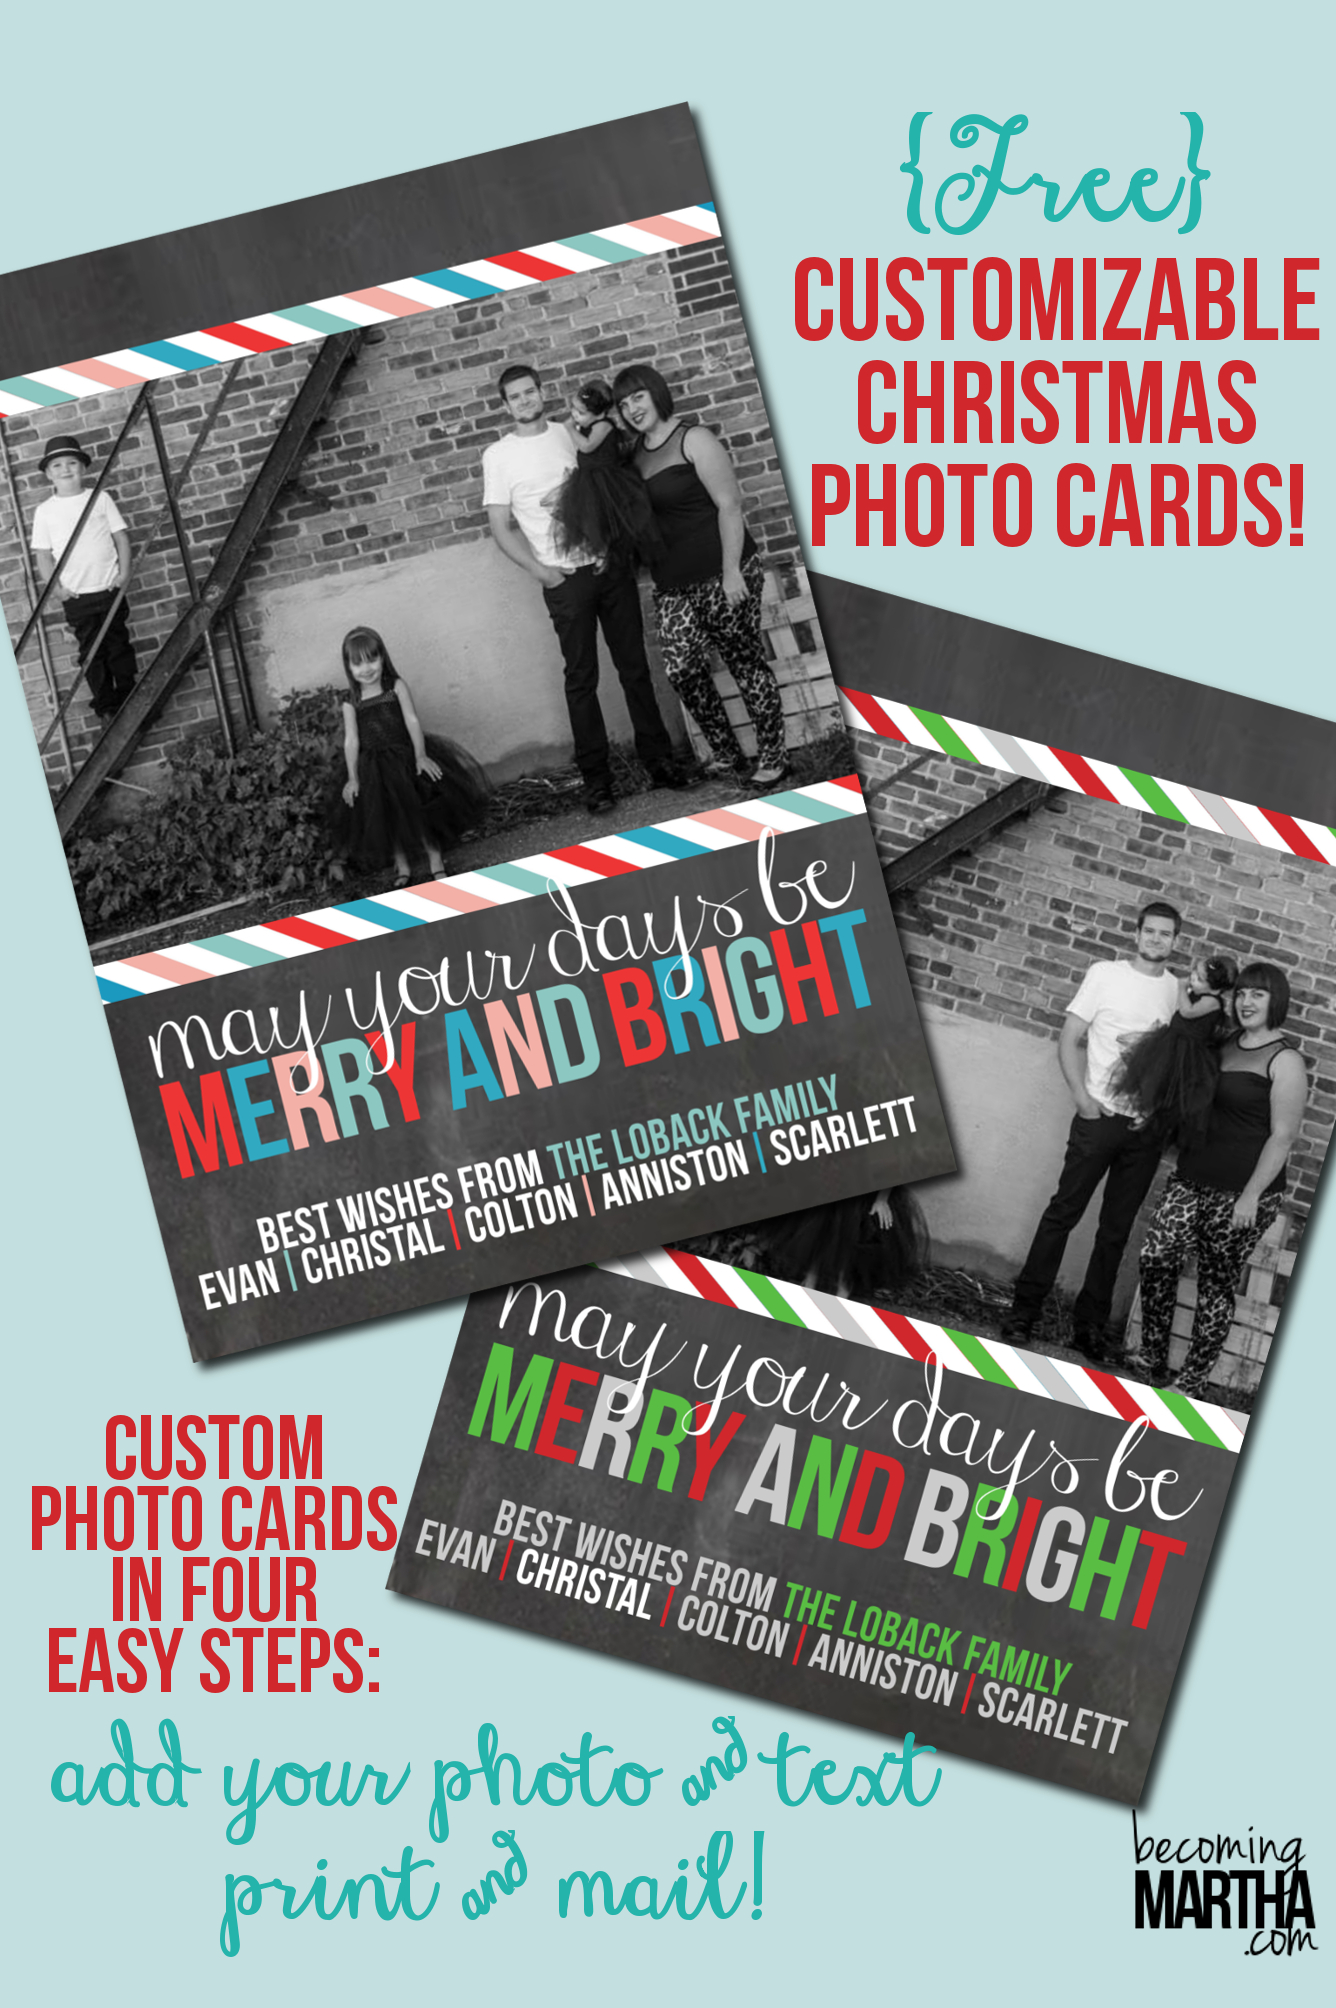 Free Printable Christmas Cards {Customize With Your Own Photo!} - Free Printable Photo Christmas Cards